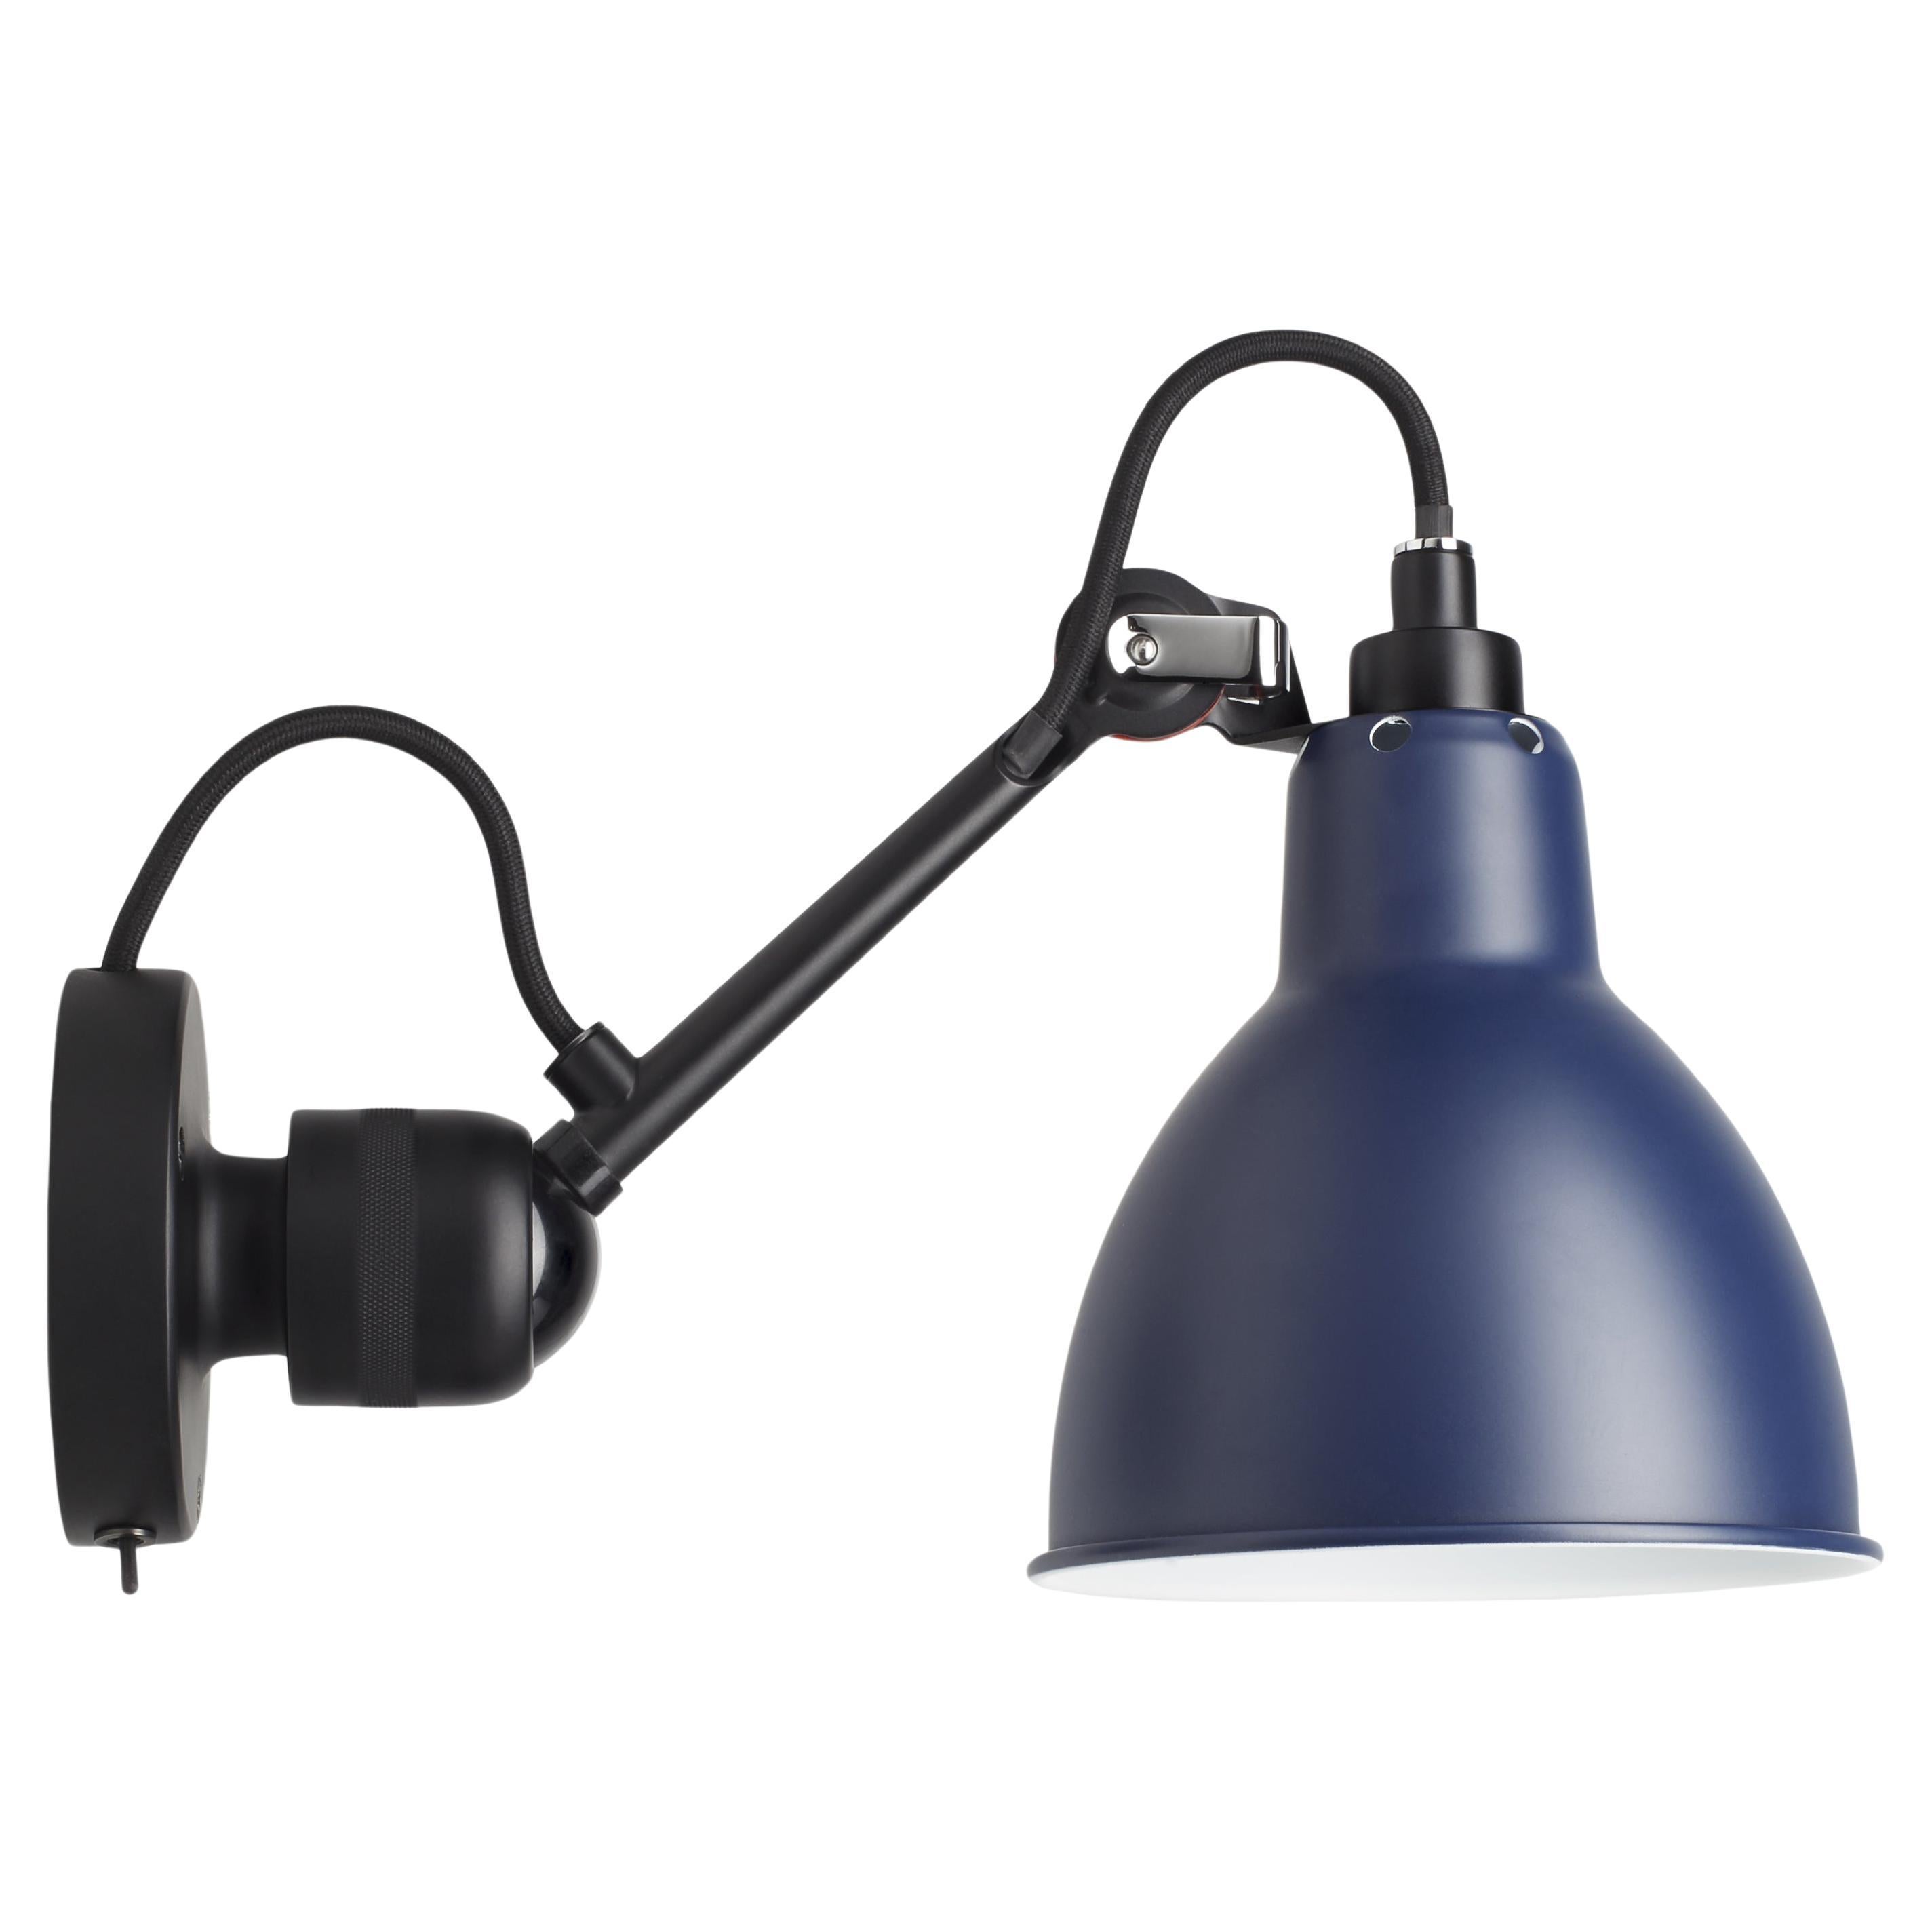 DCW Editions La Lampe Gras N°304 SW Wall Lamp in Black Arm and Blue Shade For Sale